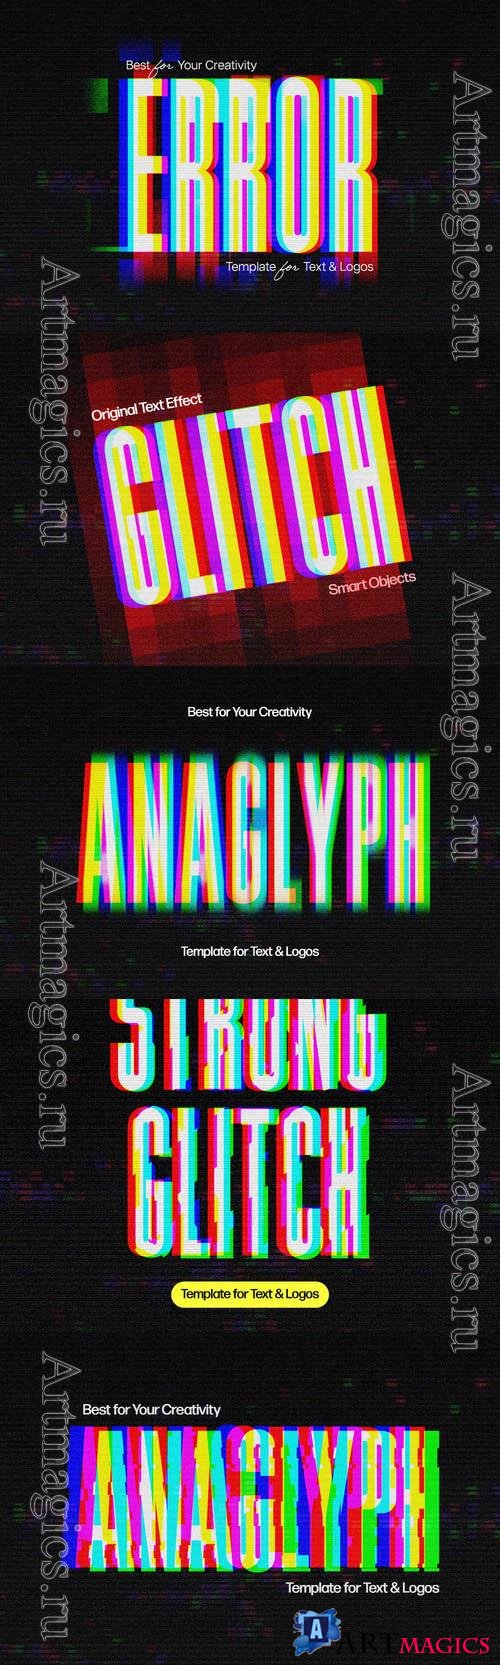 PSD error, anaglyph, hacker, strong, vibrant, glitch text effect